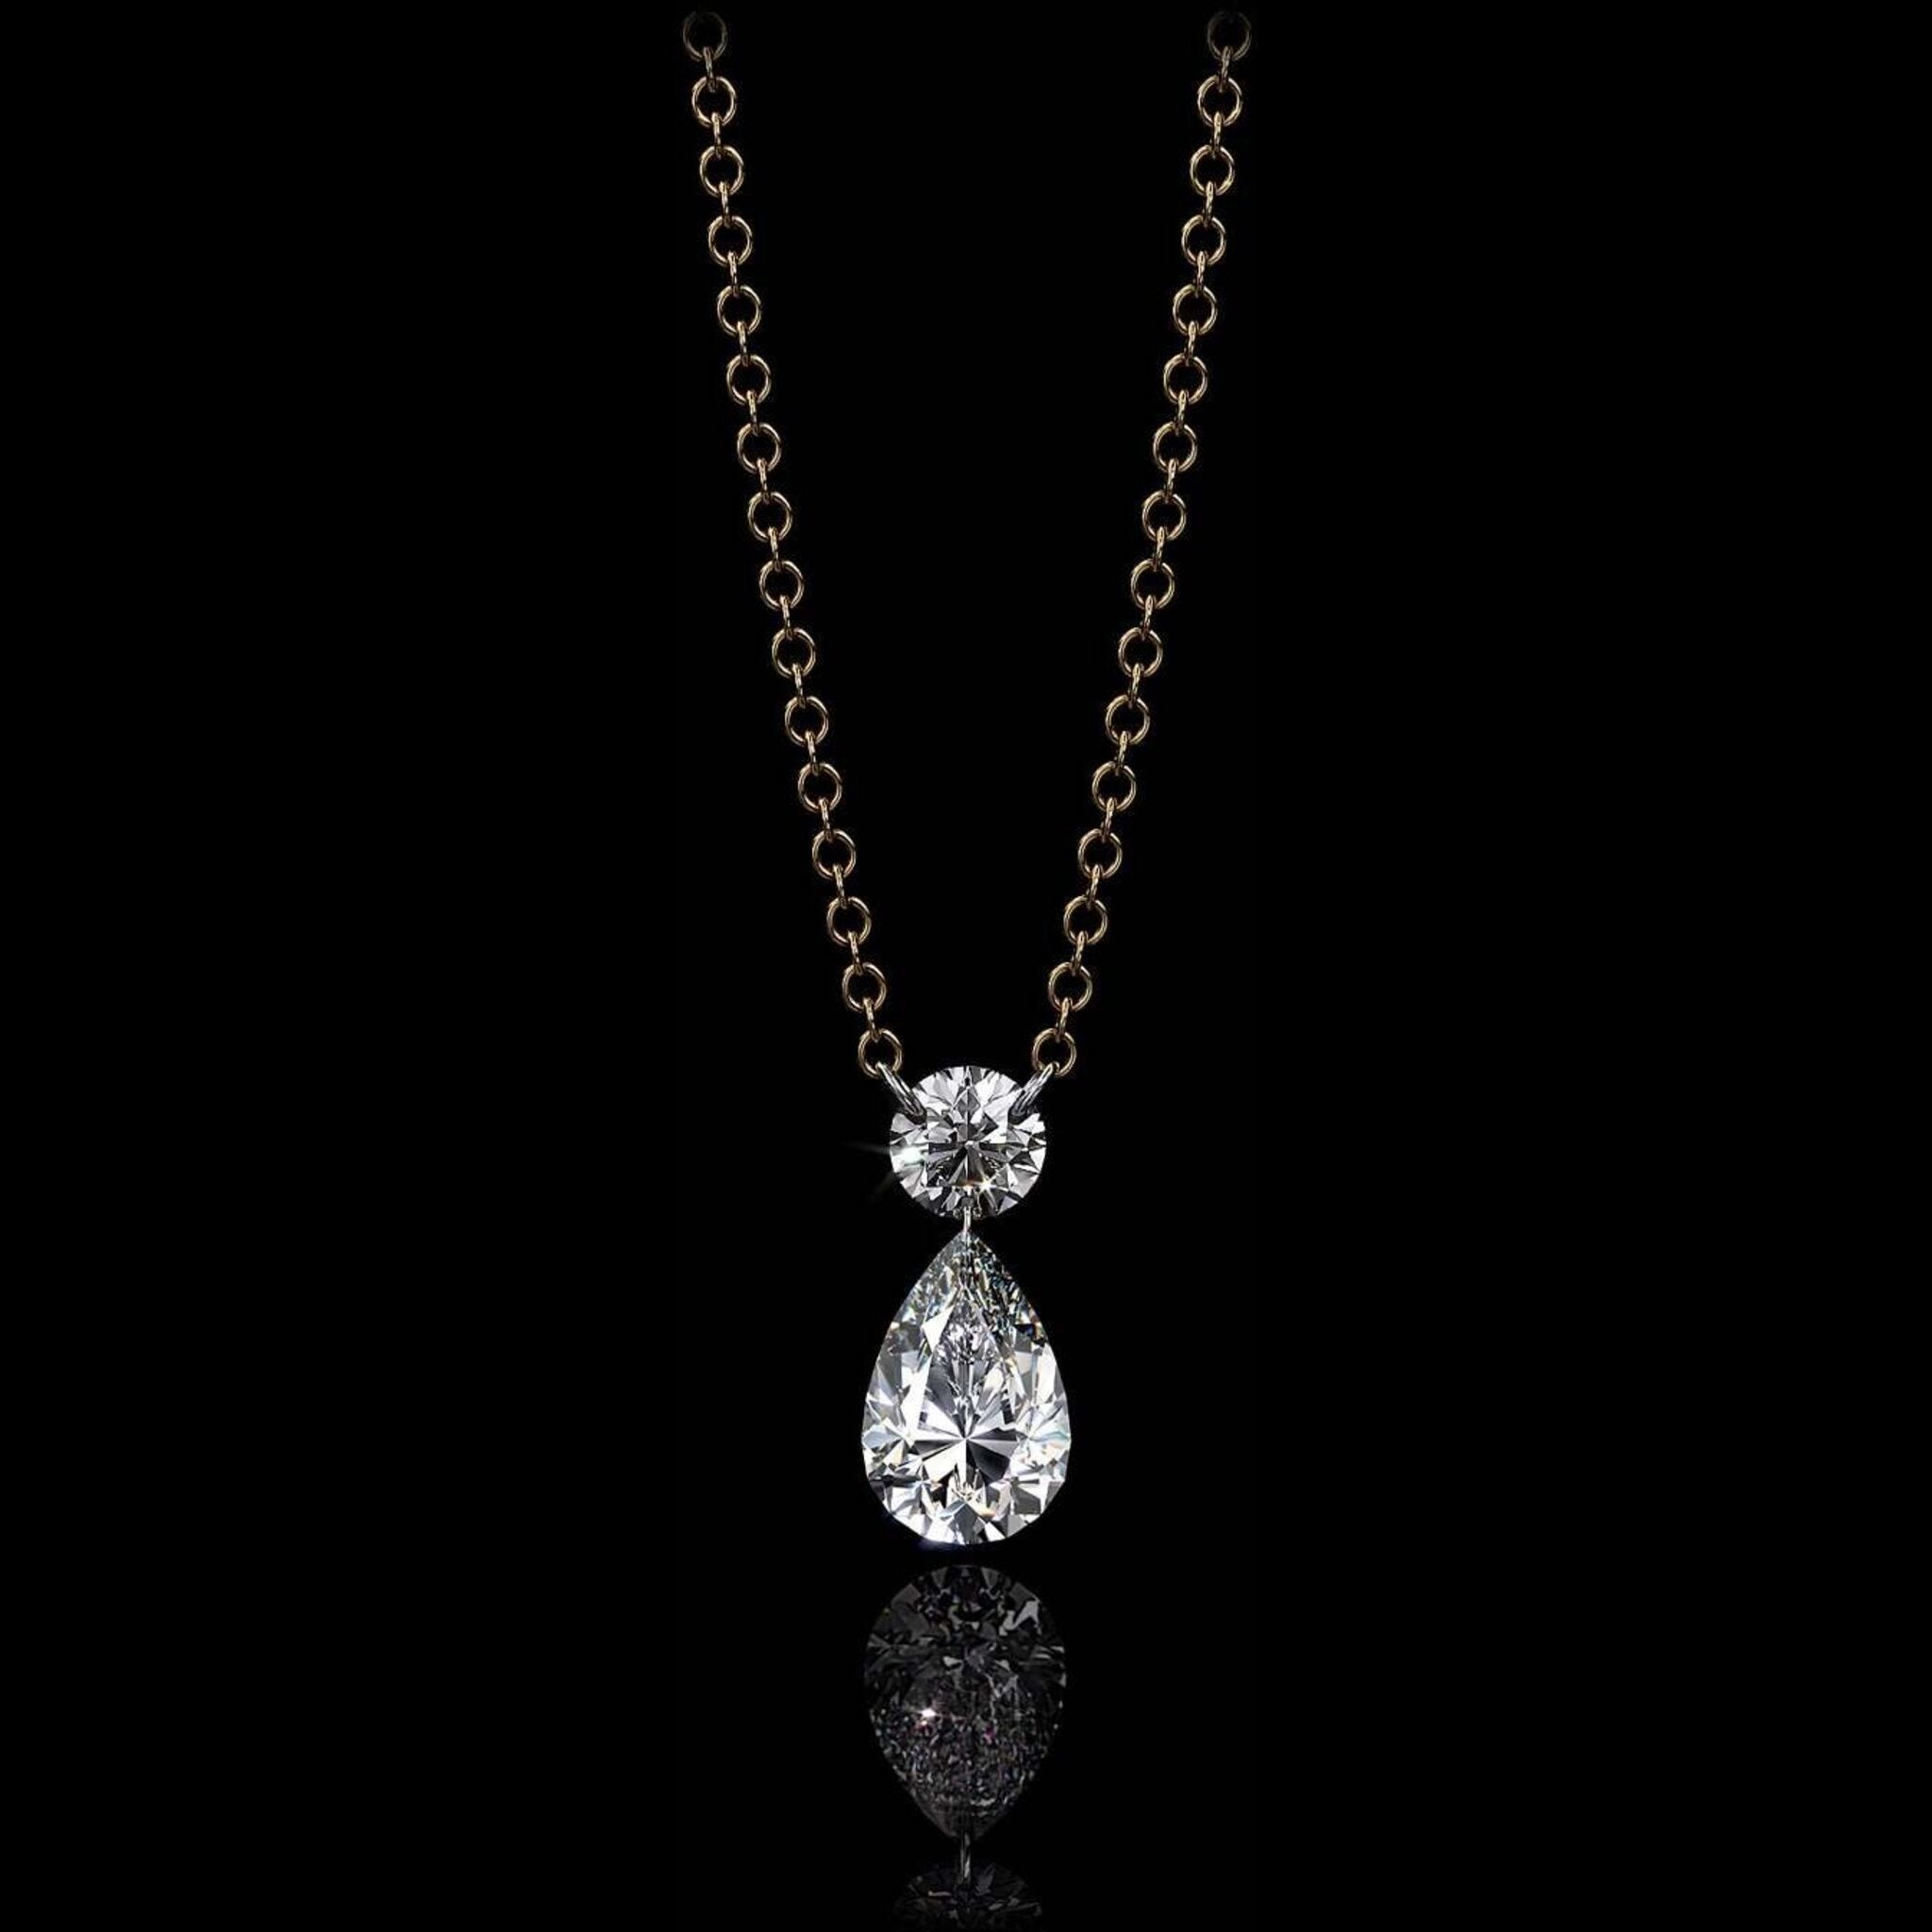 Aresa New York - Morrison No. 2 with Pear Necklaces - 18K Yellow Gold with 0.40 cts. of Diamonds